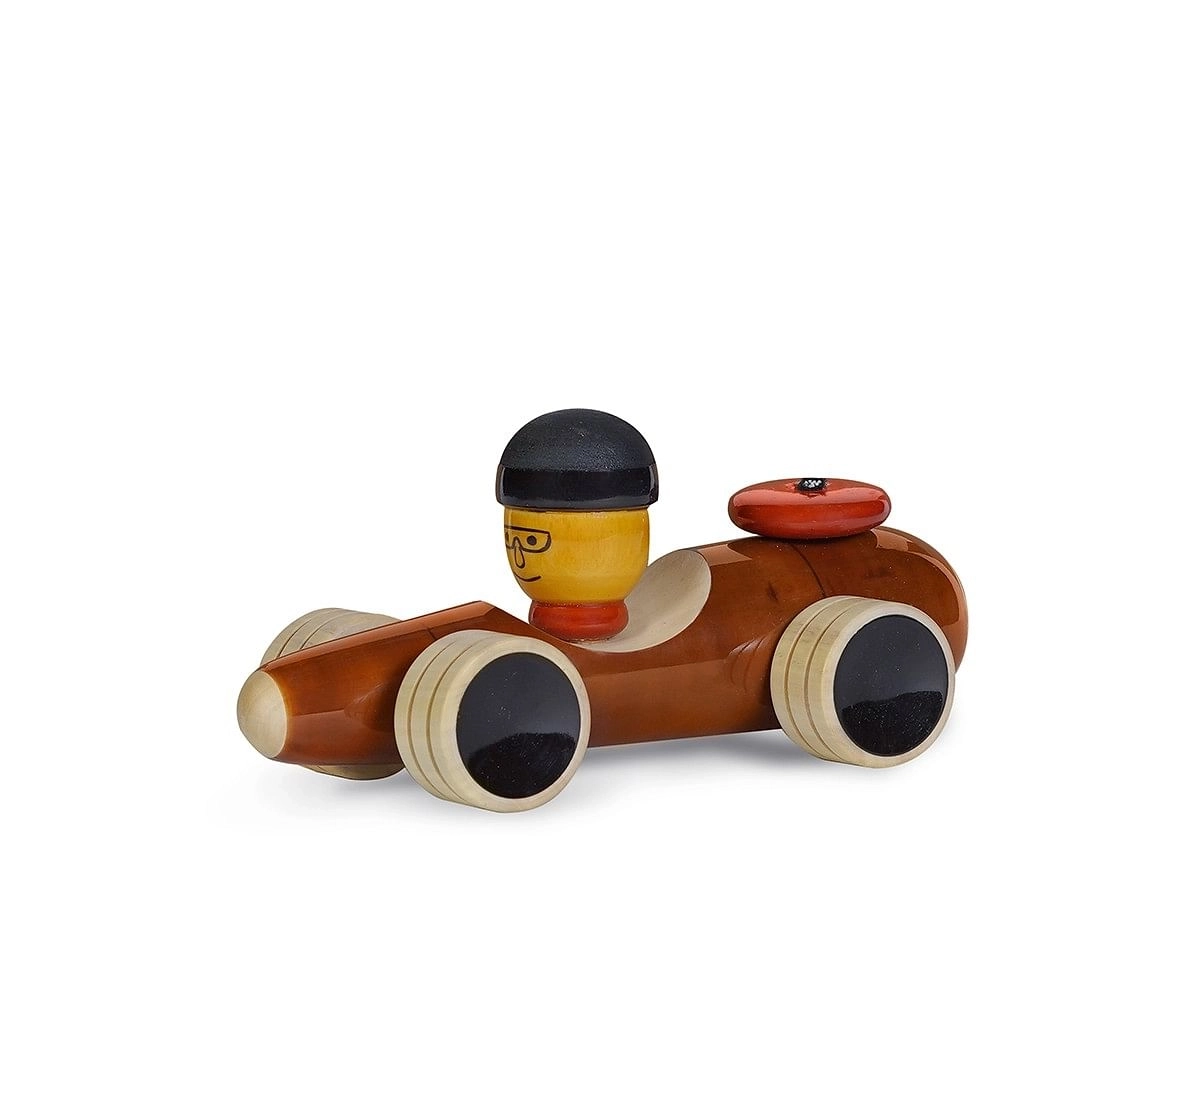 Folktales Handmade Wooden Vroom Toy 2 Wooden Toys for Kids age 1Y+ (Brown)